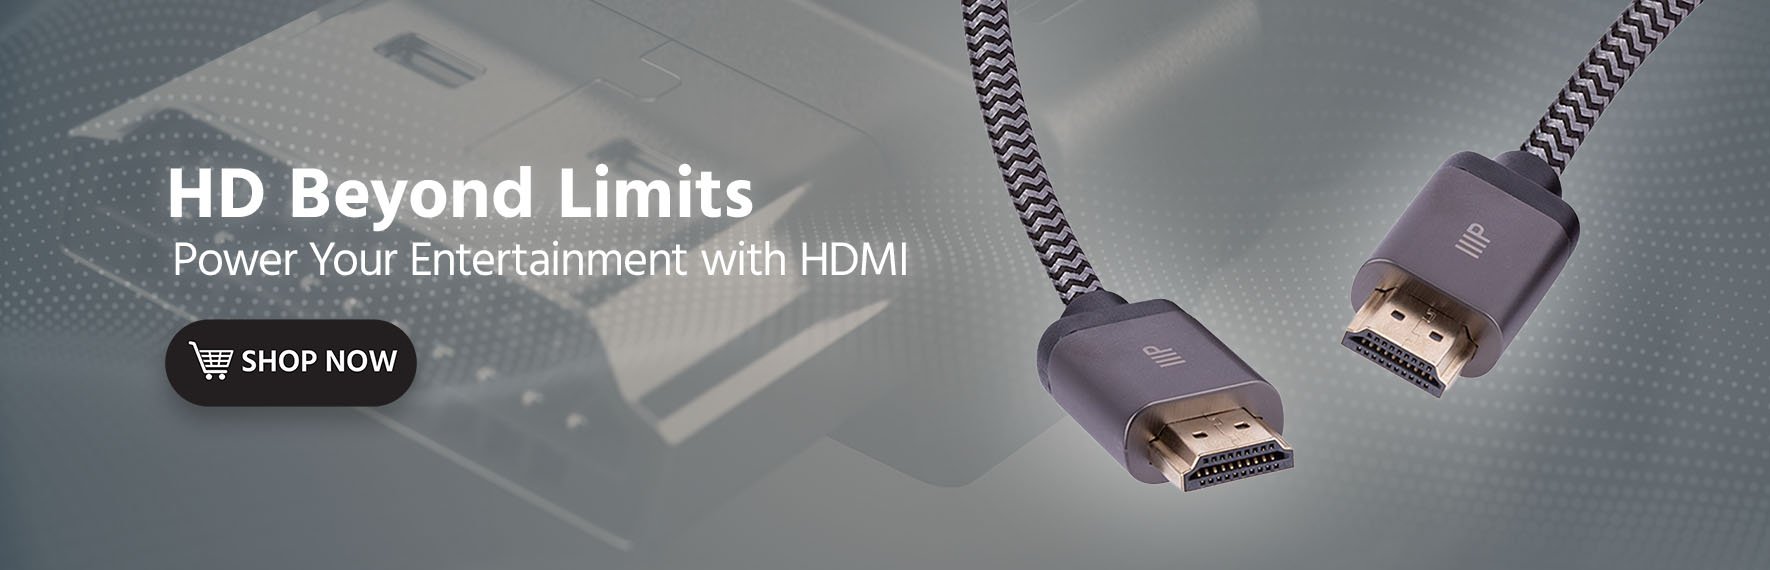 HD Beyond Limits: Power Your Entertainment with HDMI Shop Now"